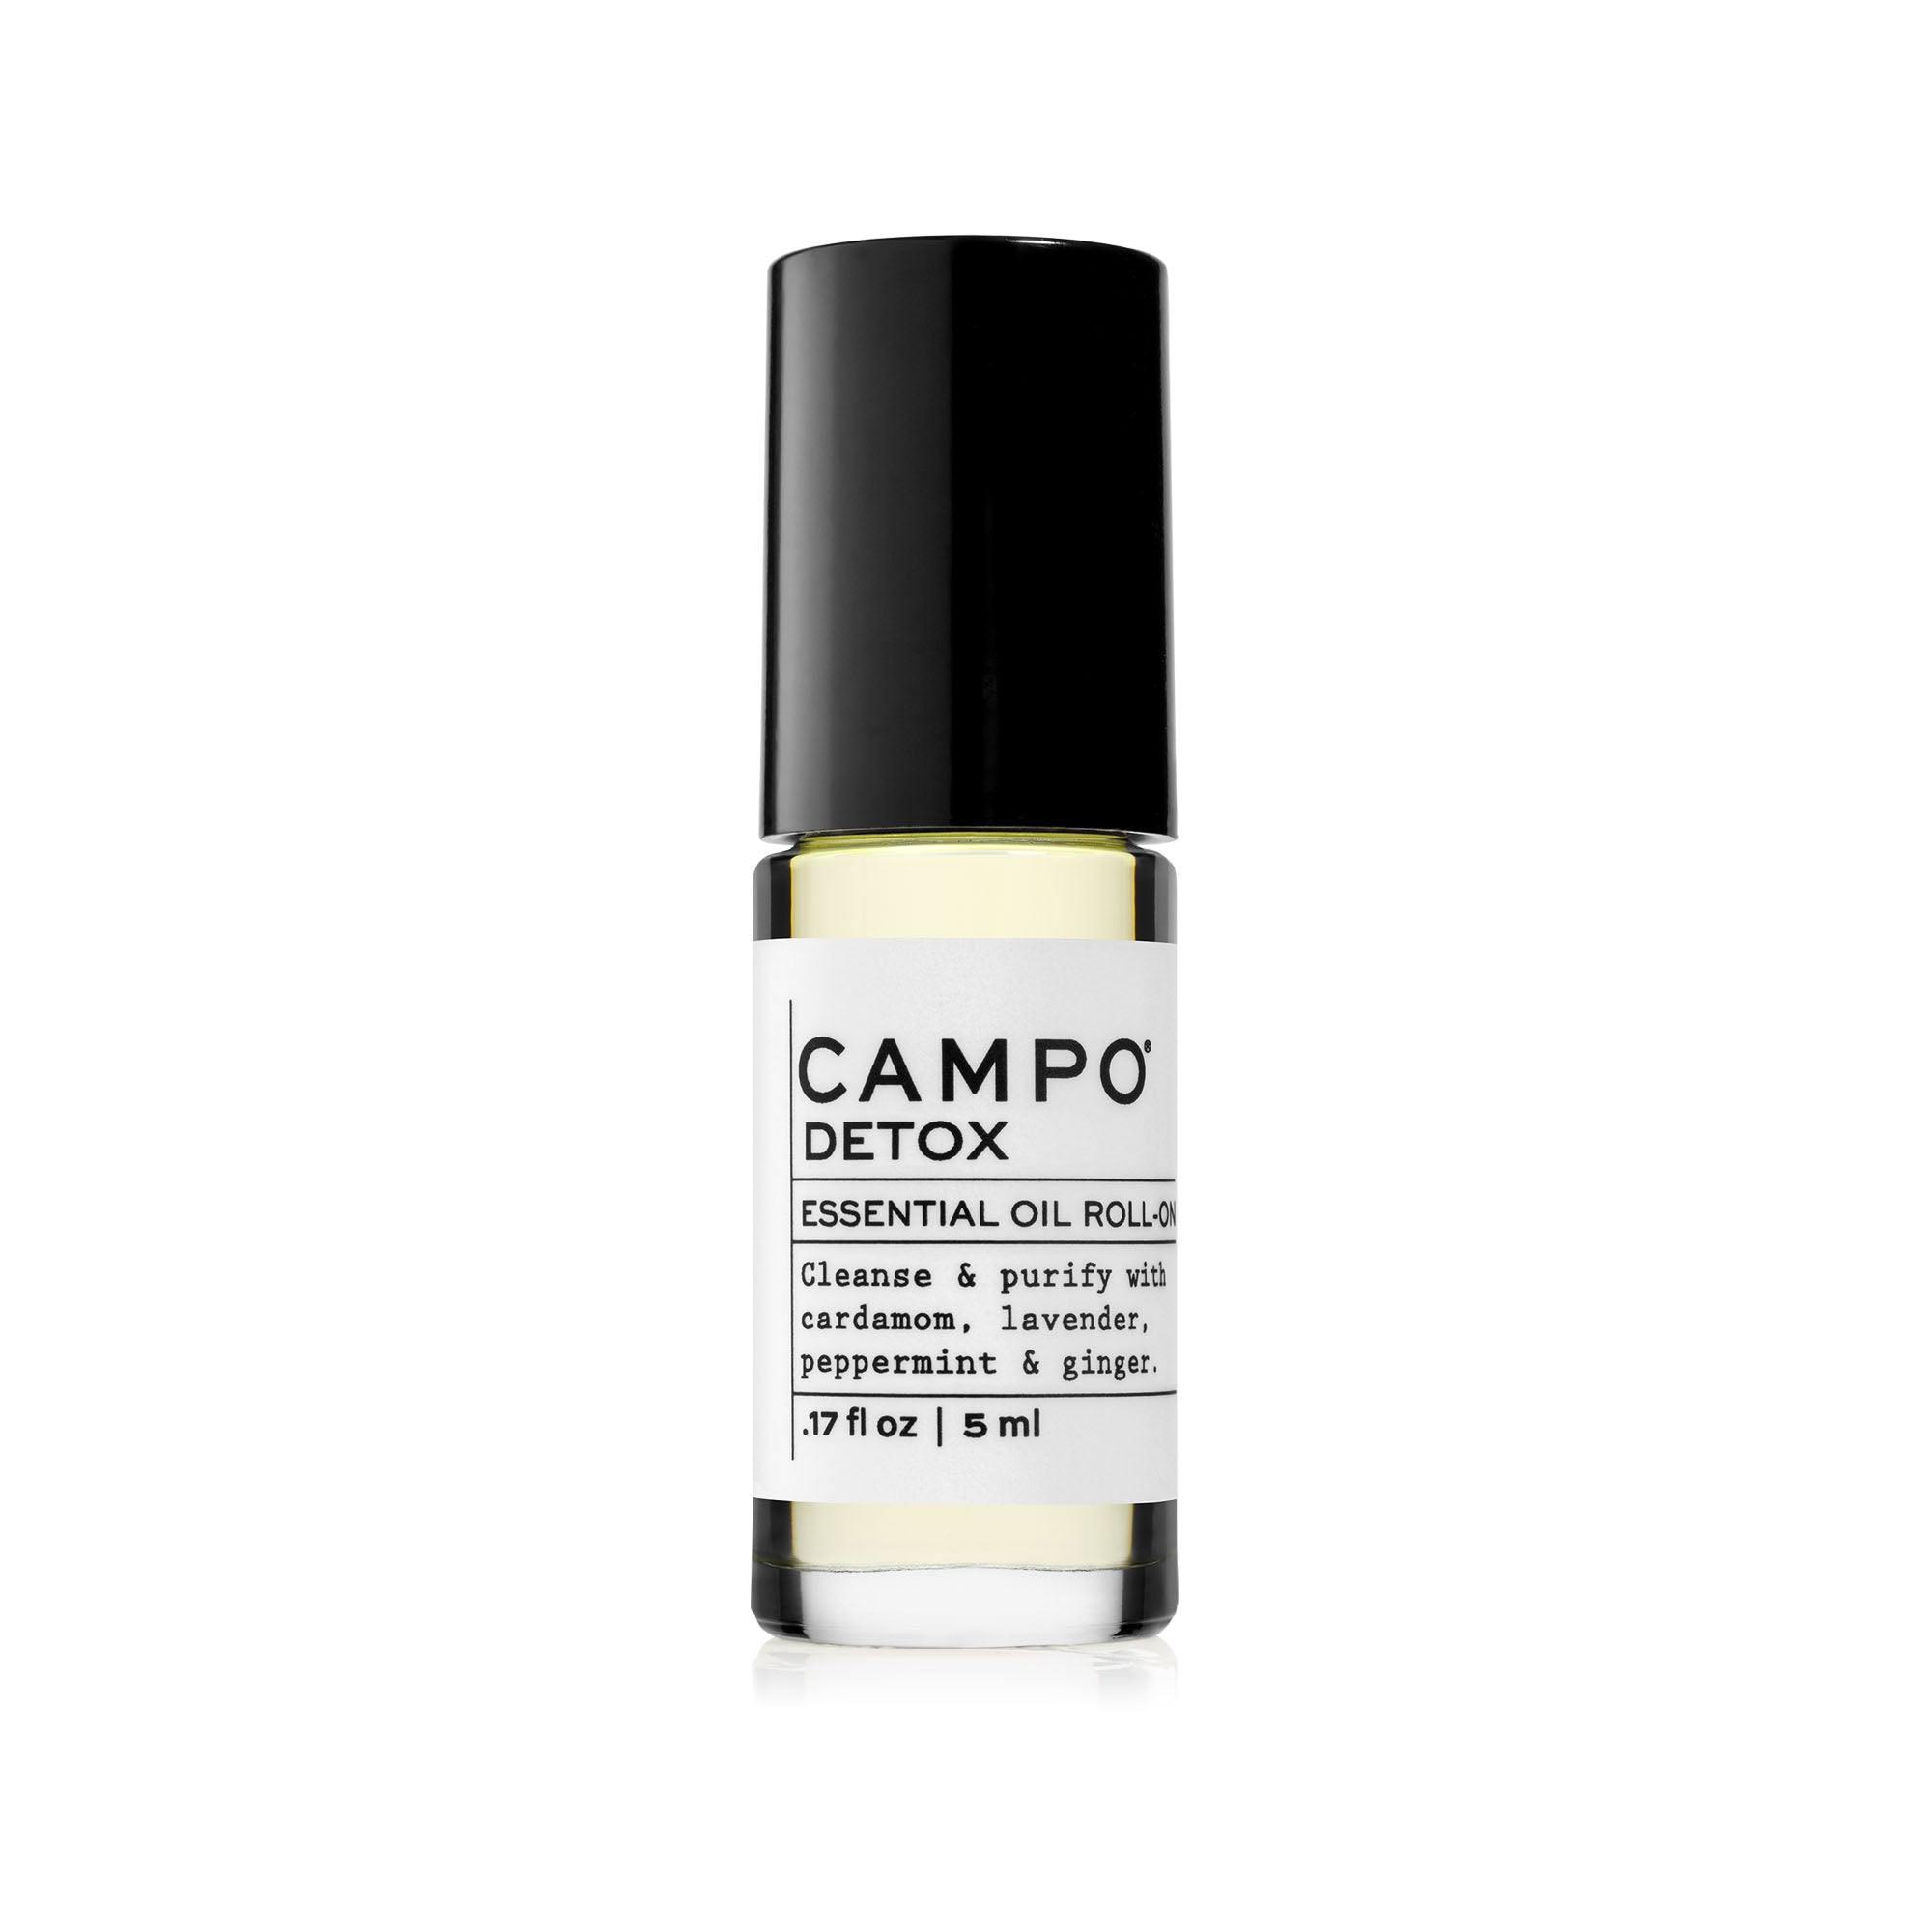 CAMPO Beauty 5 ml DETOX Blend Essential Oil Roll-On. Cleanse & purify your body naturally. Help eliminate toxins naturally with this 100% natural essential oil roll-on blend of Cardamom, Lavender, Peppermint & Ginger. Pre-blended with 100% natural beauty carrier oils. Jet set and ready to roll.